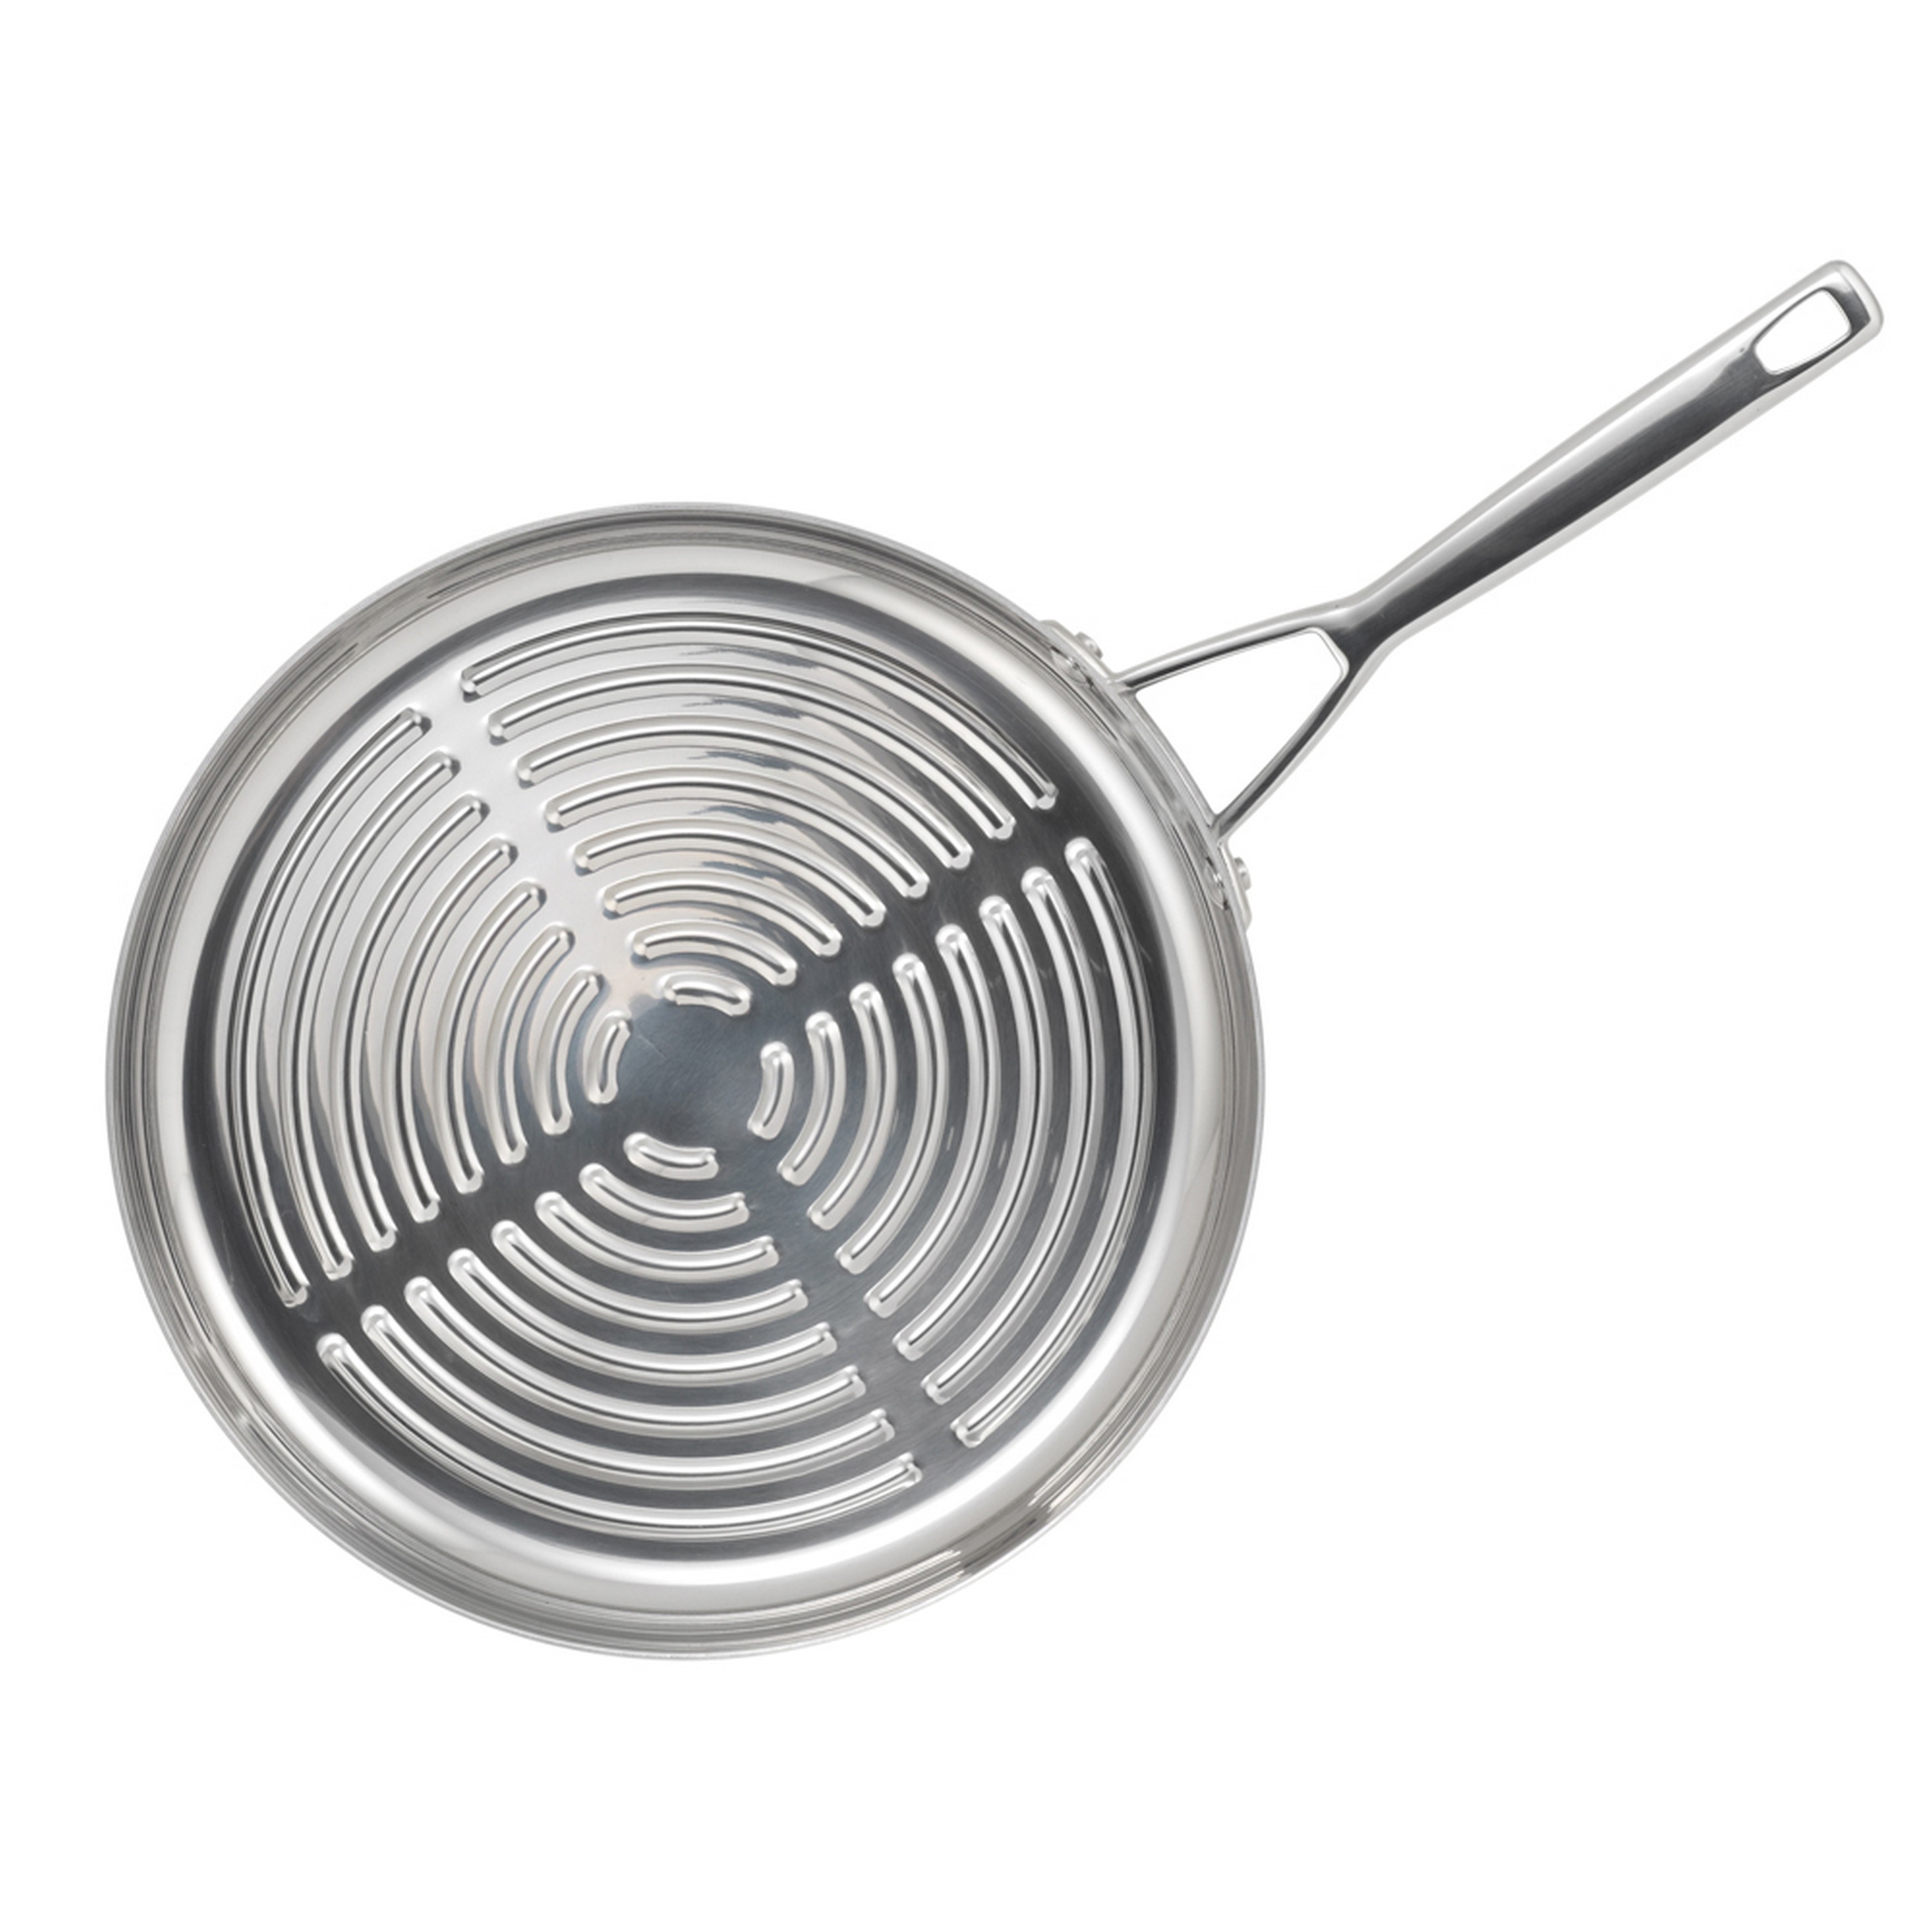 https://ak1.ostkcdn.com/images/products/9206659/Anolon-Tri-Ply-Clad-Stainless-Steel-12-inch-Deep-Round-Grill-Pan-d877030a-d488-489b-afcc-64229d7aa026.jpg